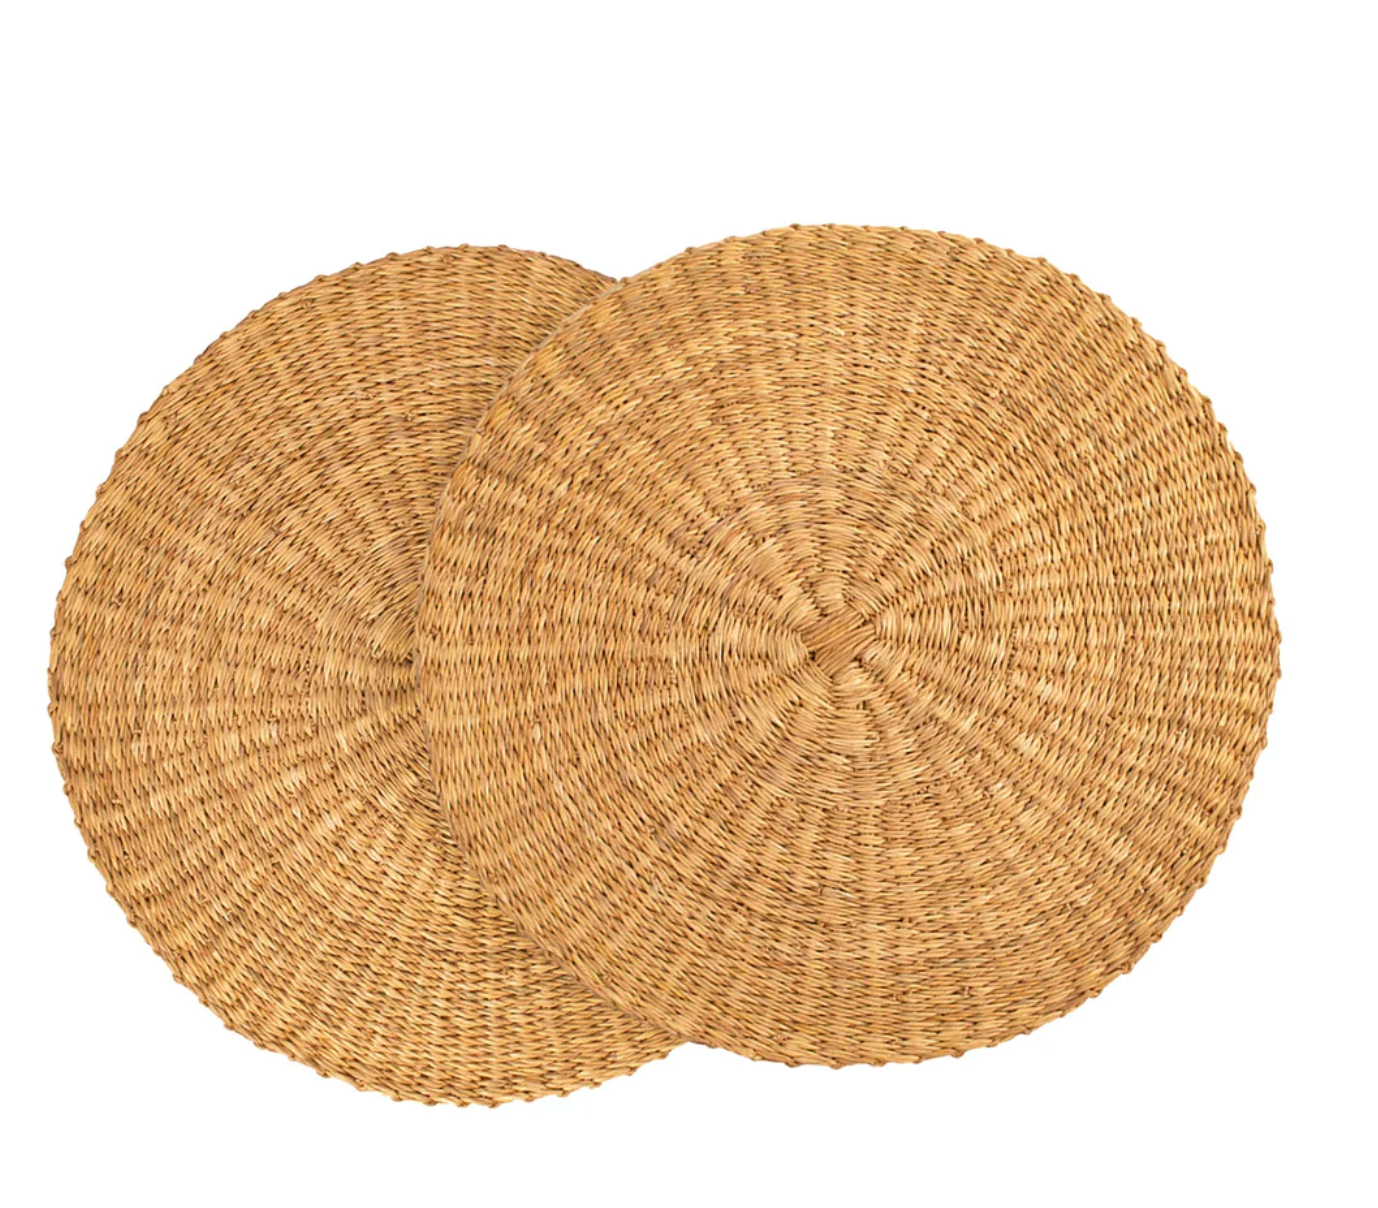 Woven Placemats from Uganda